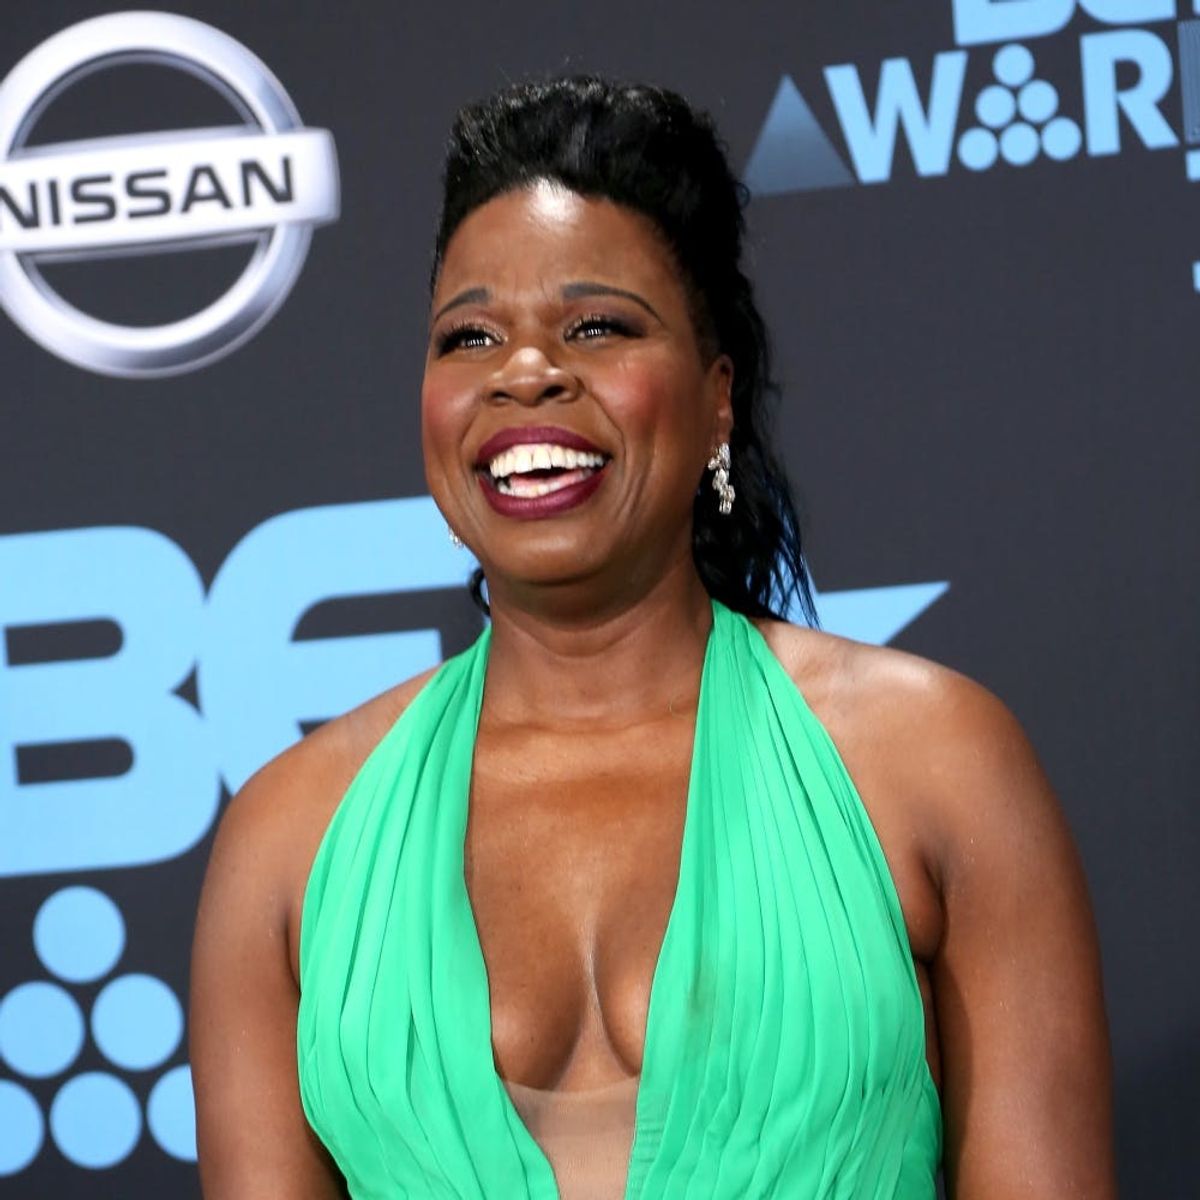 Leslie Jones Is Calling Out the Ritz-Carlton Hotel With Accusations of Racism